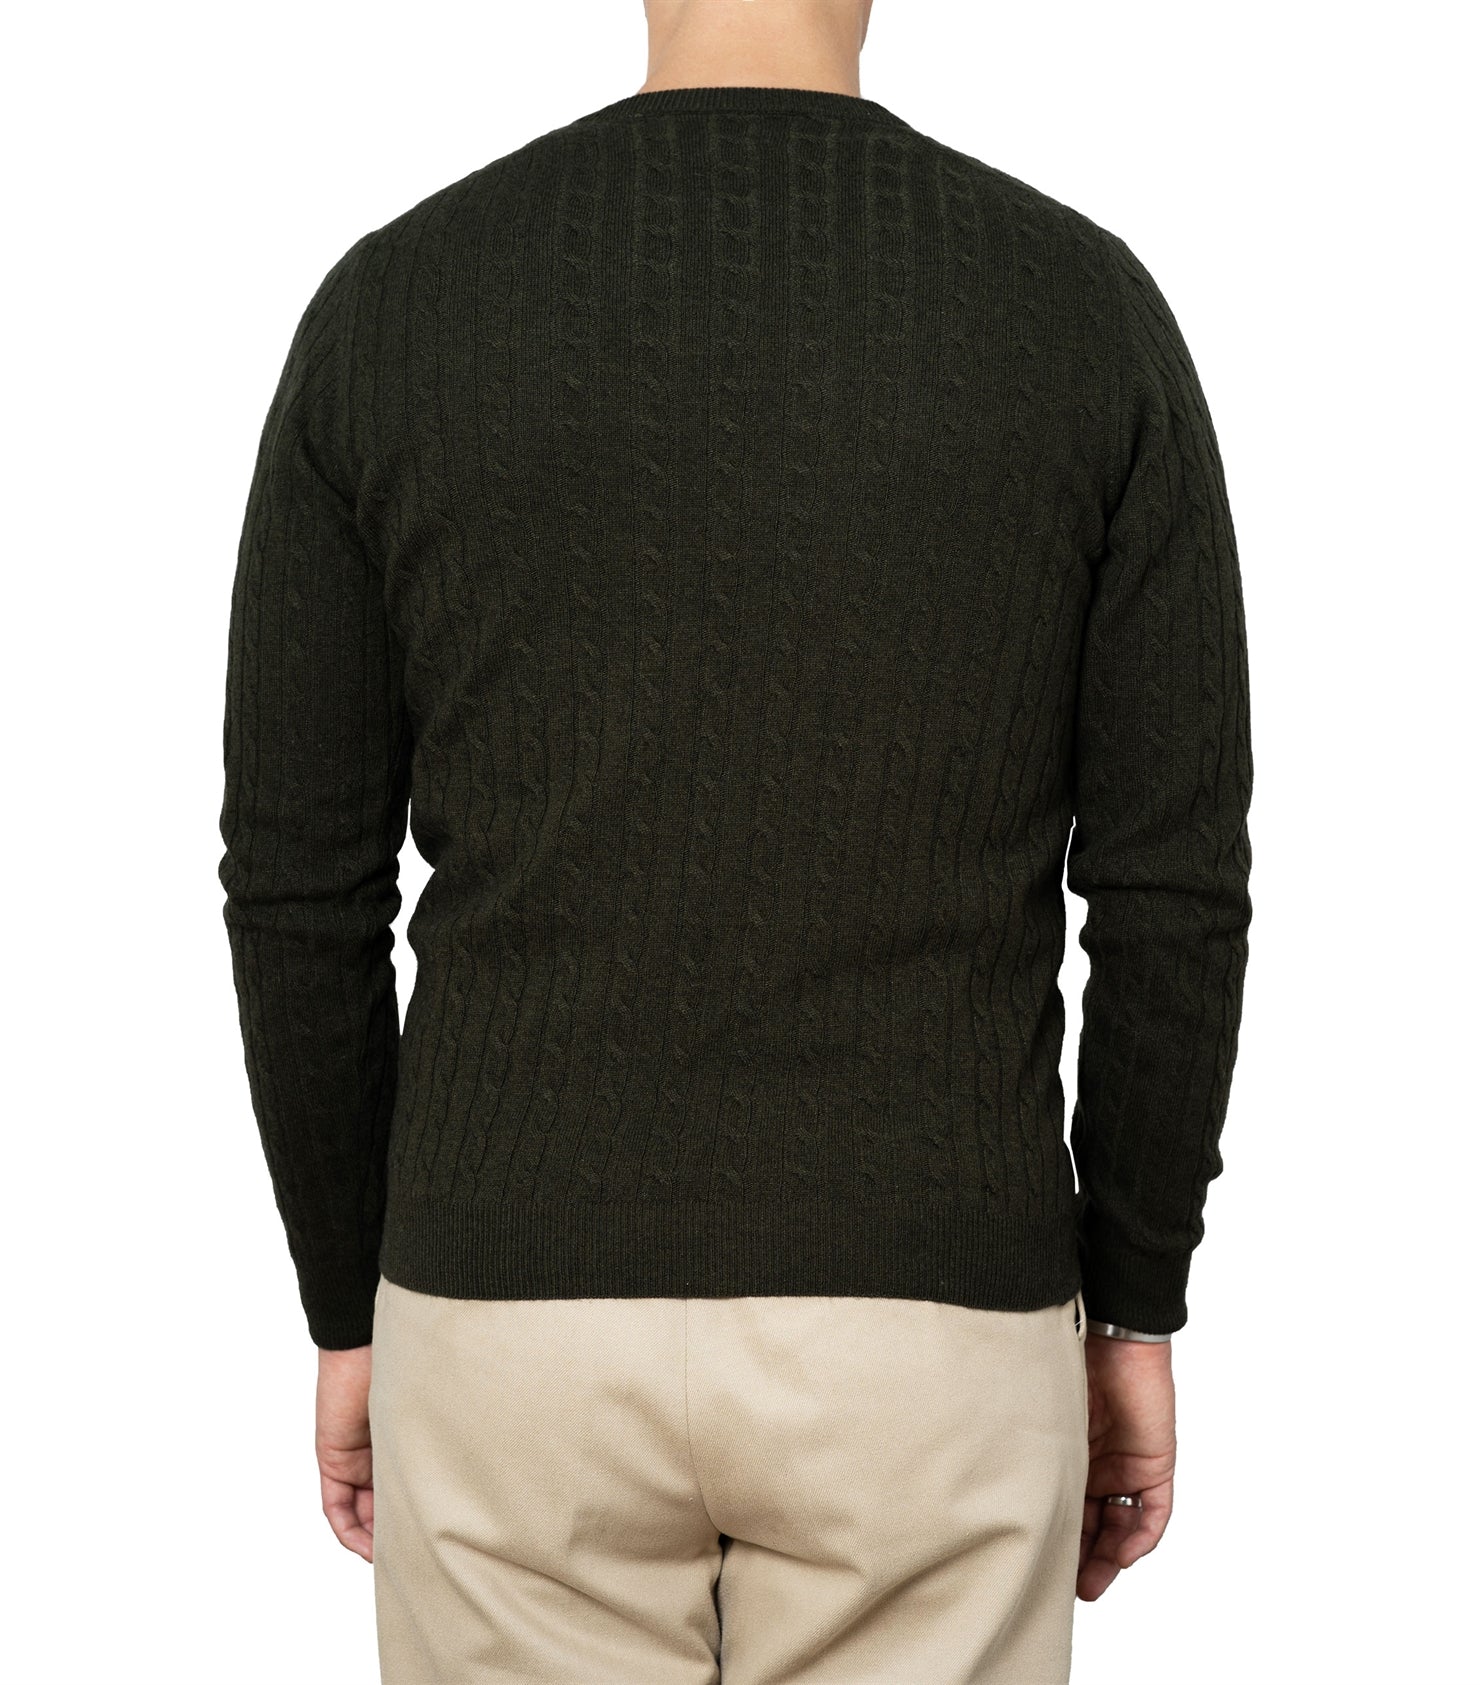 Enar Green Cable Knit Sweater